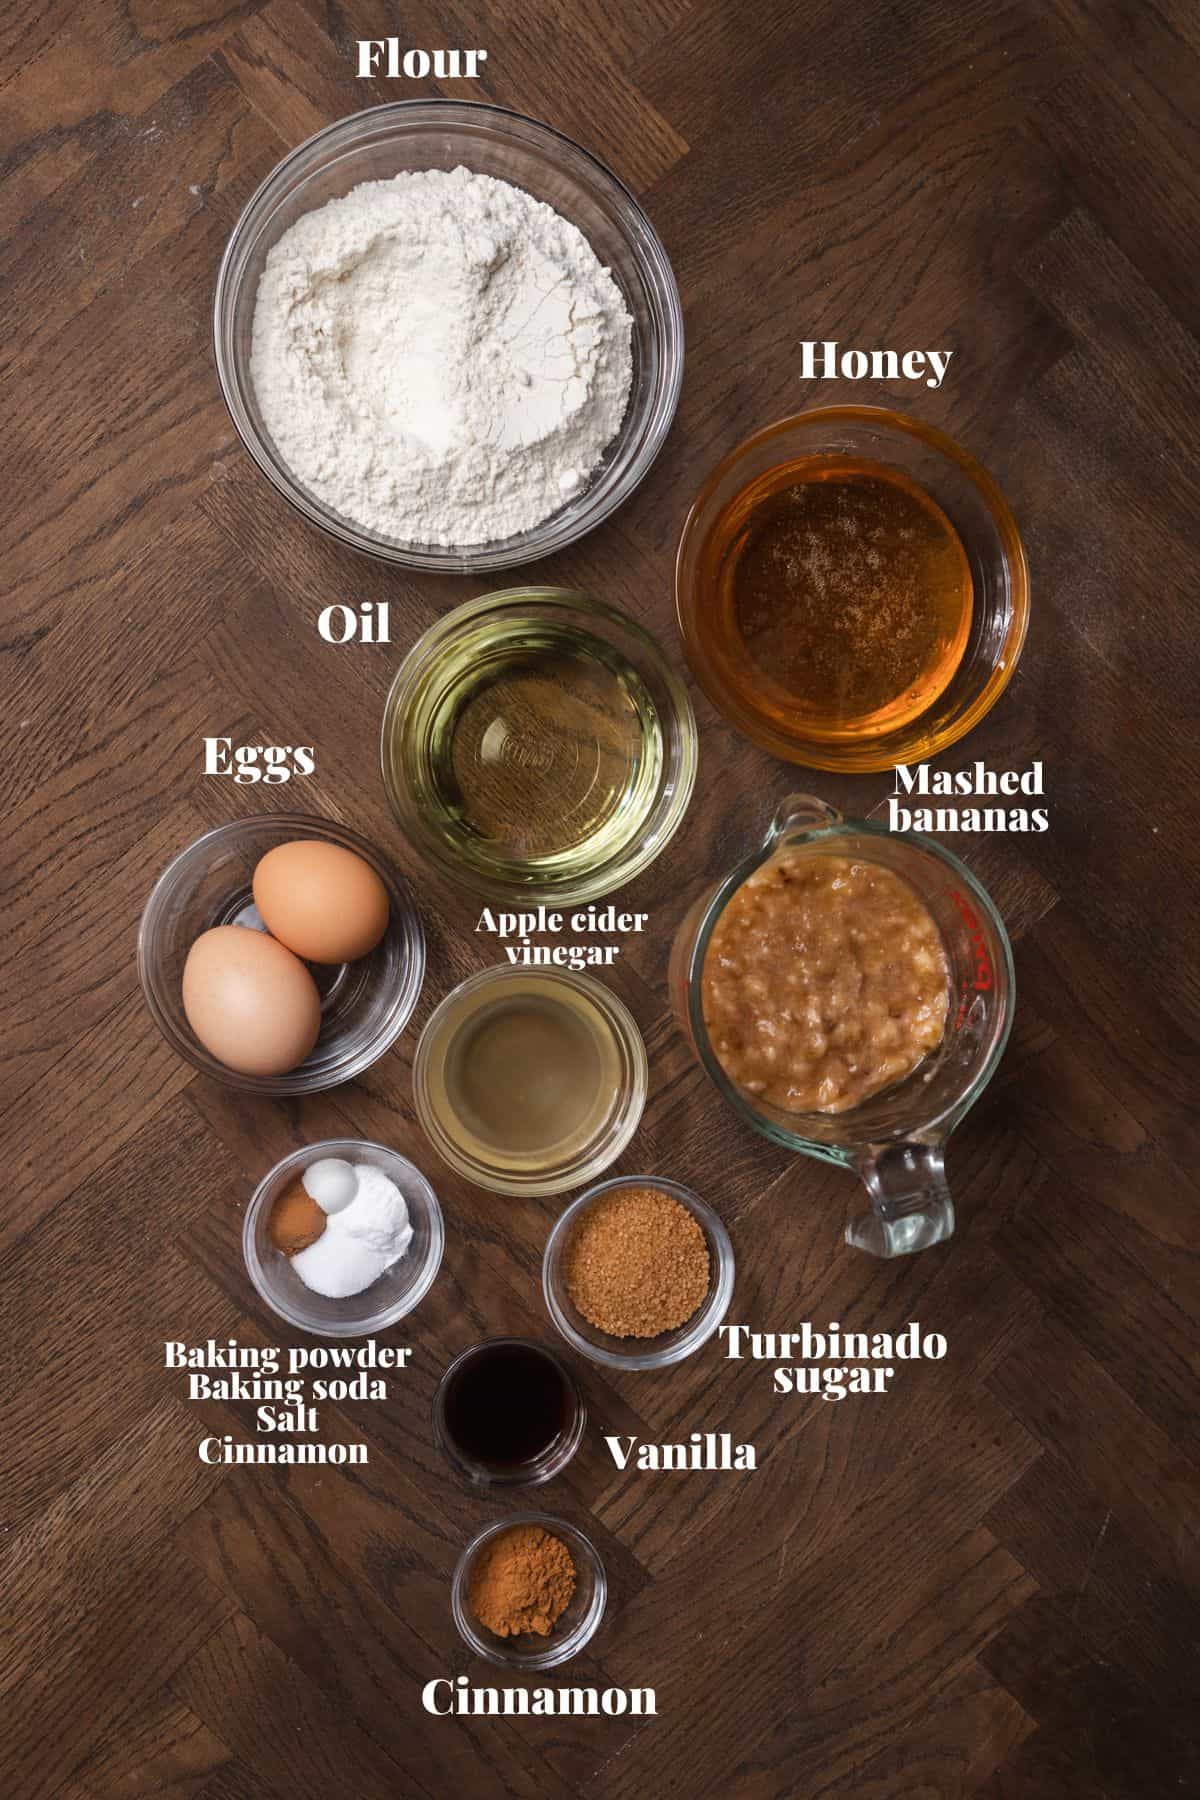 Ingredients to make banana bread on a wooden surface.